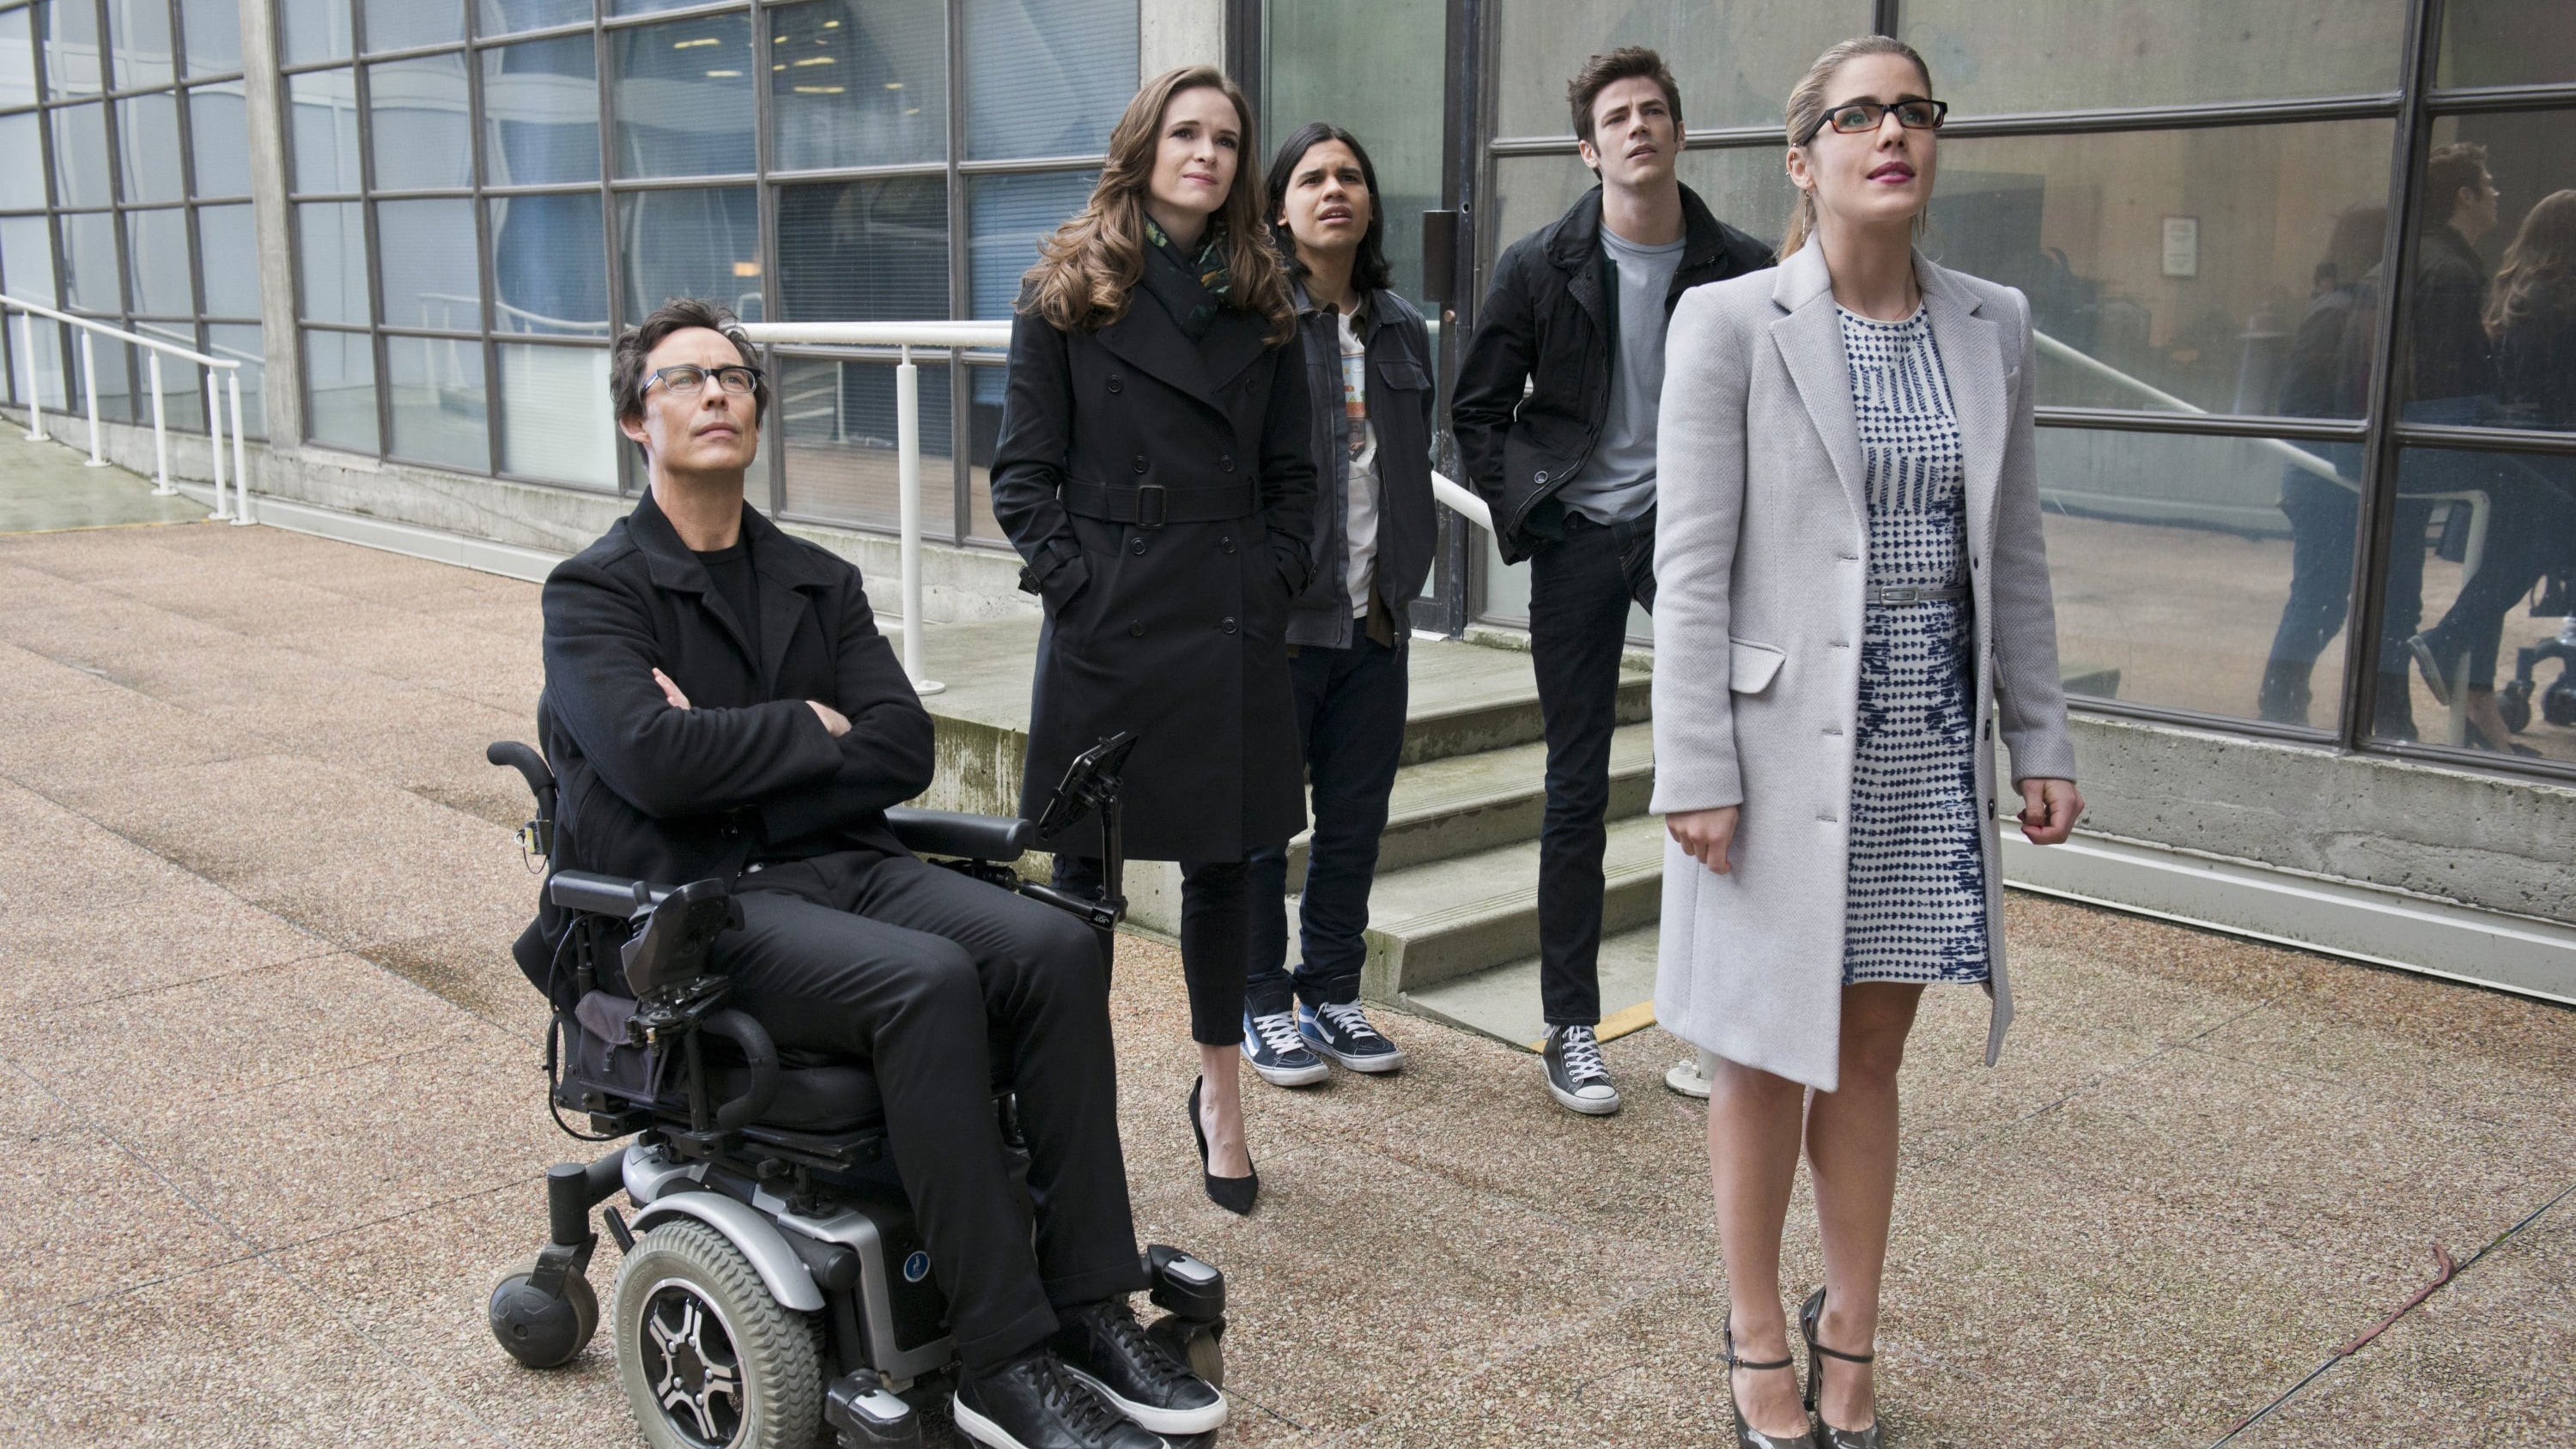 The Flash - Season 1 Episode 18 : All-Star Team Up